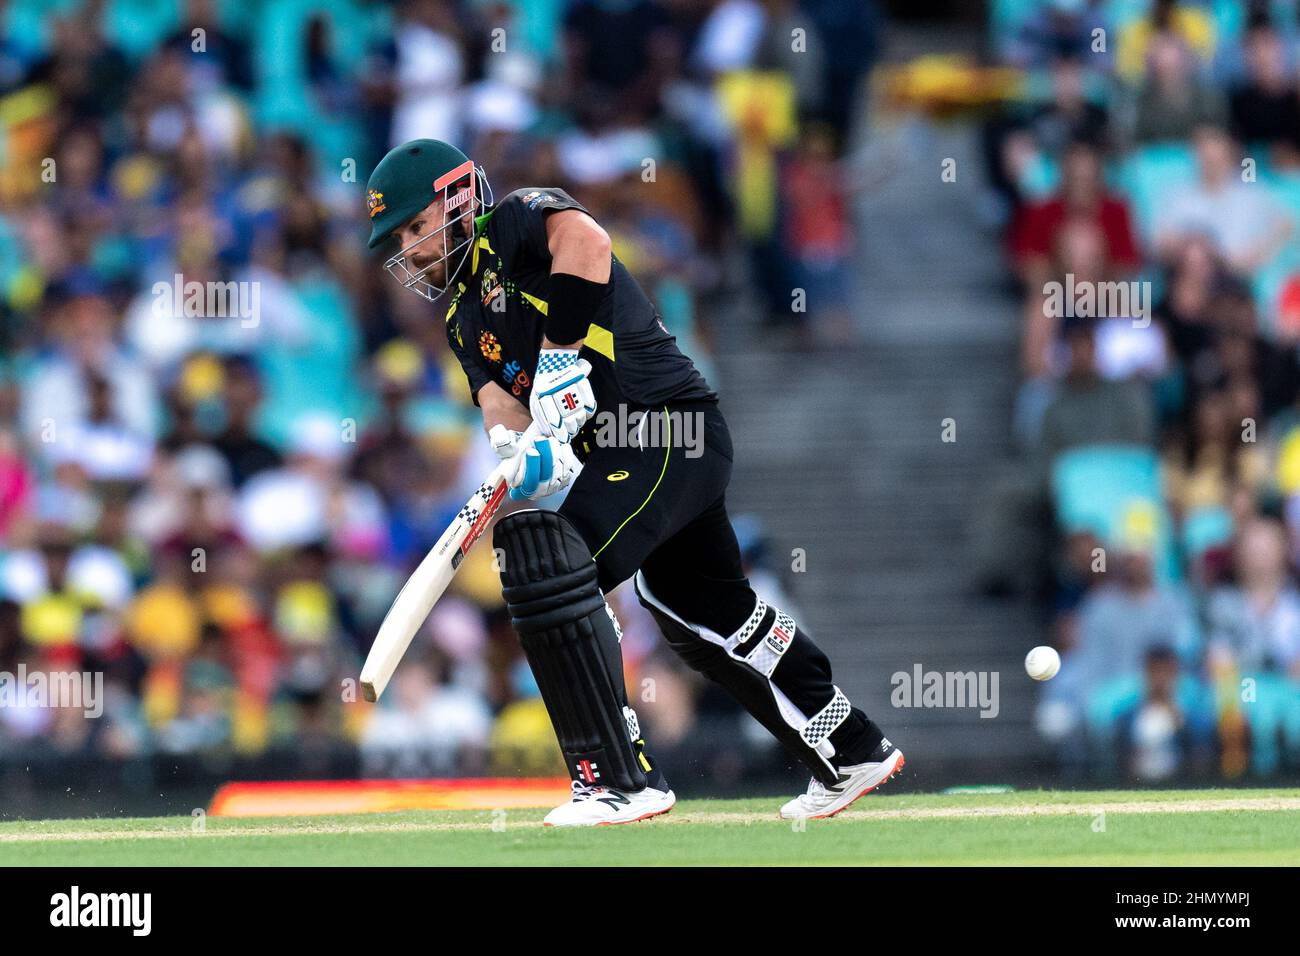 Sydney, Australia. 13th Feb, 2022. Aaron Finch of Australia bats during game two in the T20 International series between Australia and Sri Lanka at Sydney Cricket Ground on February 13, 2022 in Sydney, Australia. (Editorial use only) Credit: Izhar Ahmed Khan/Alamy Live News/Alamy Live News Stock Photo